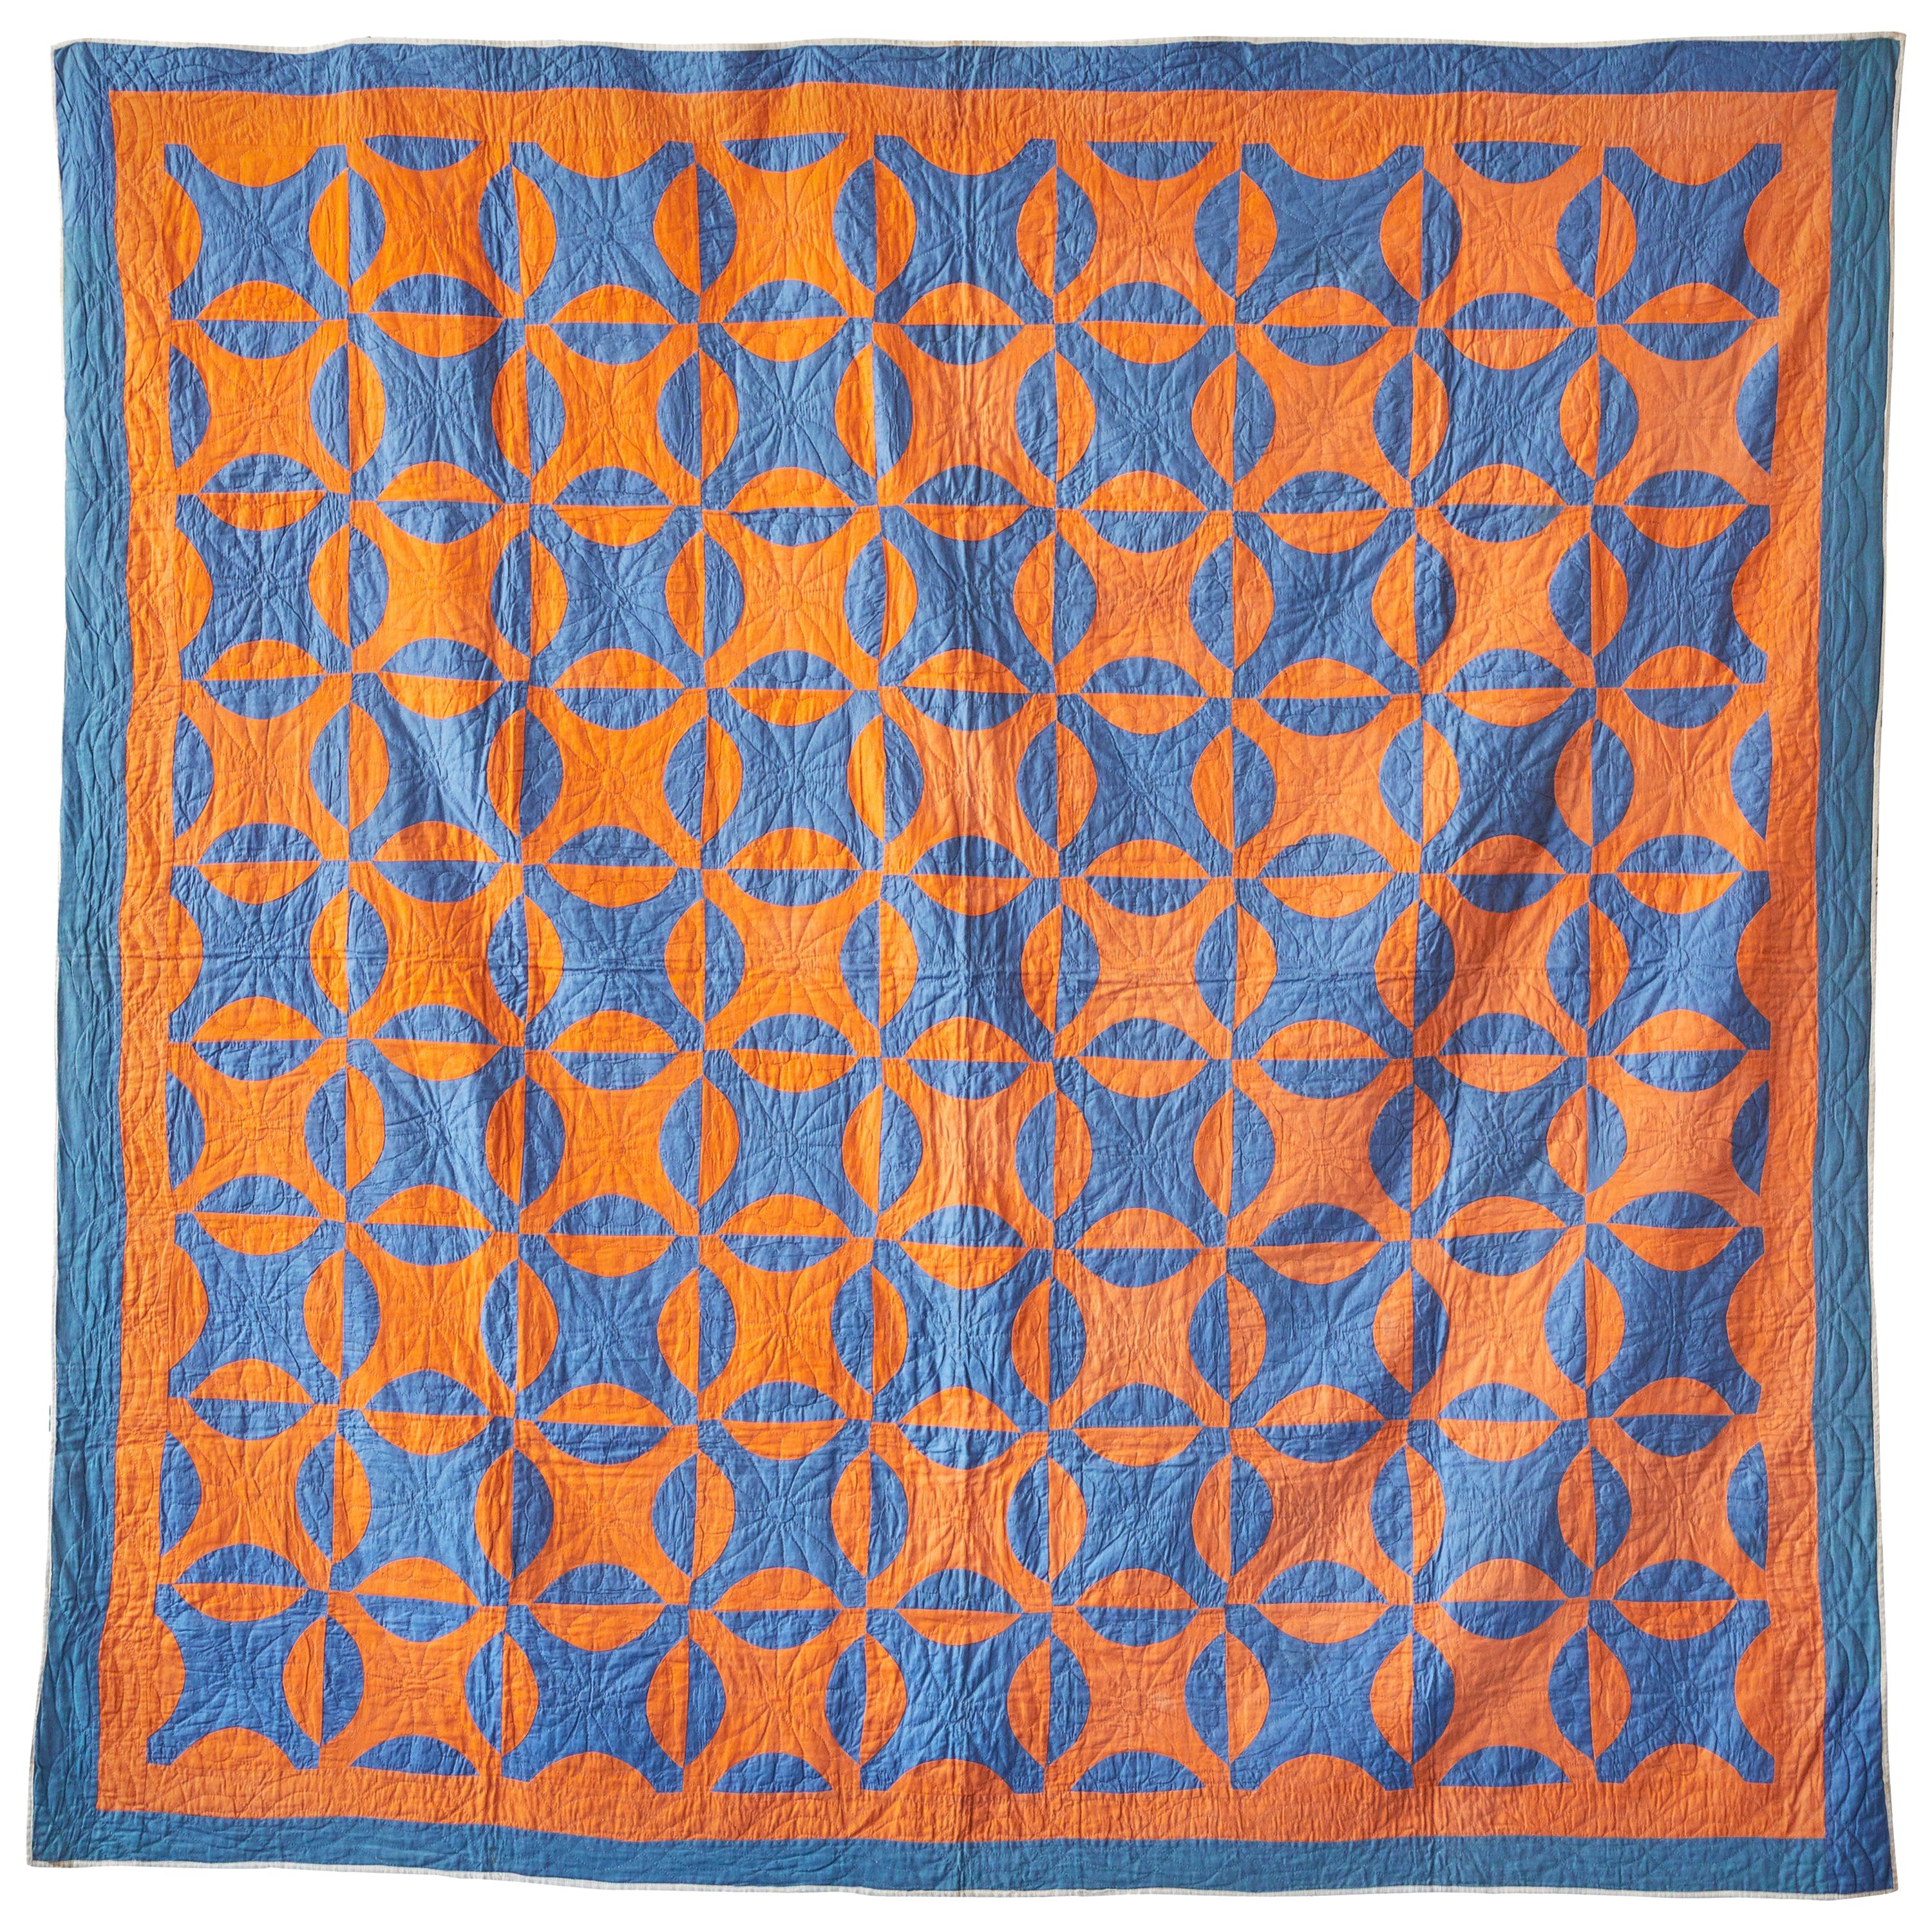 Antique American 1890s "Nine Patch" Patchwork Quilt in Orange and Blue Patterns